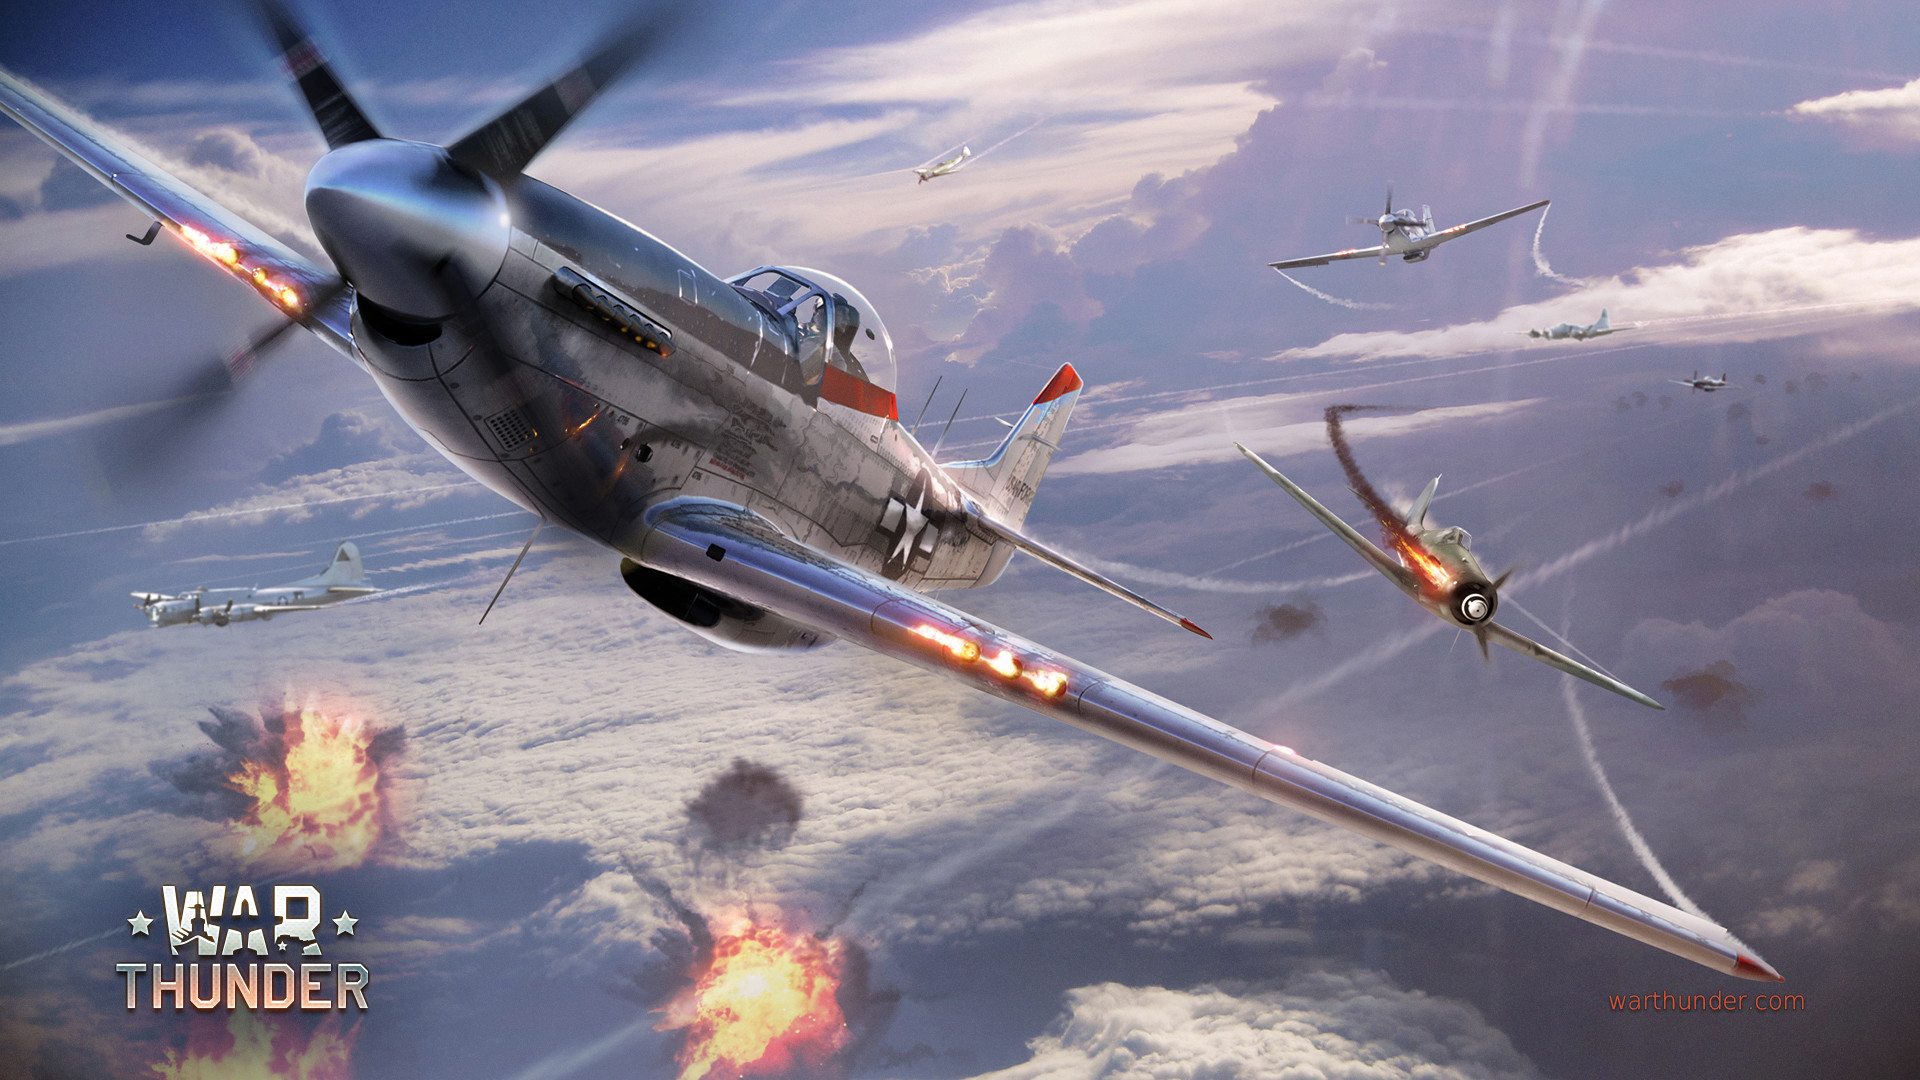 1920x1080 The best fighters of World War 2